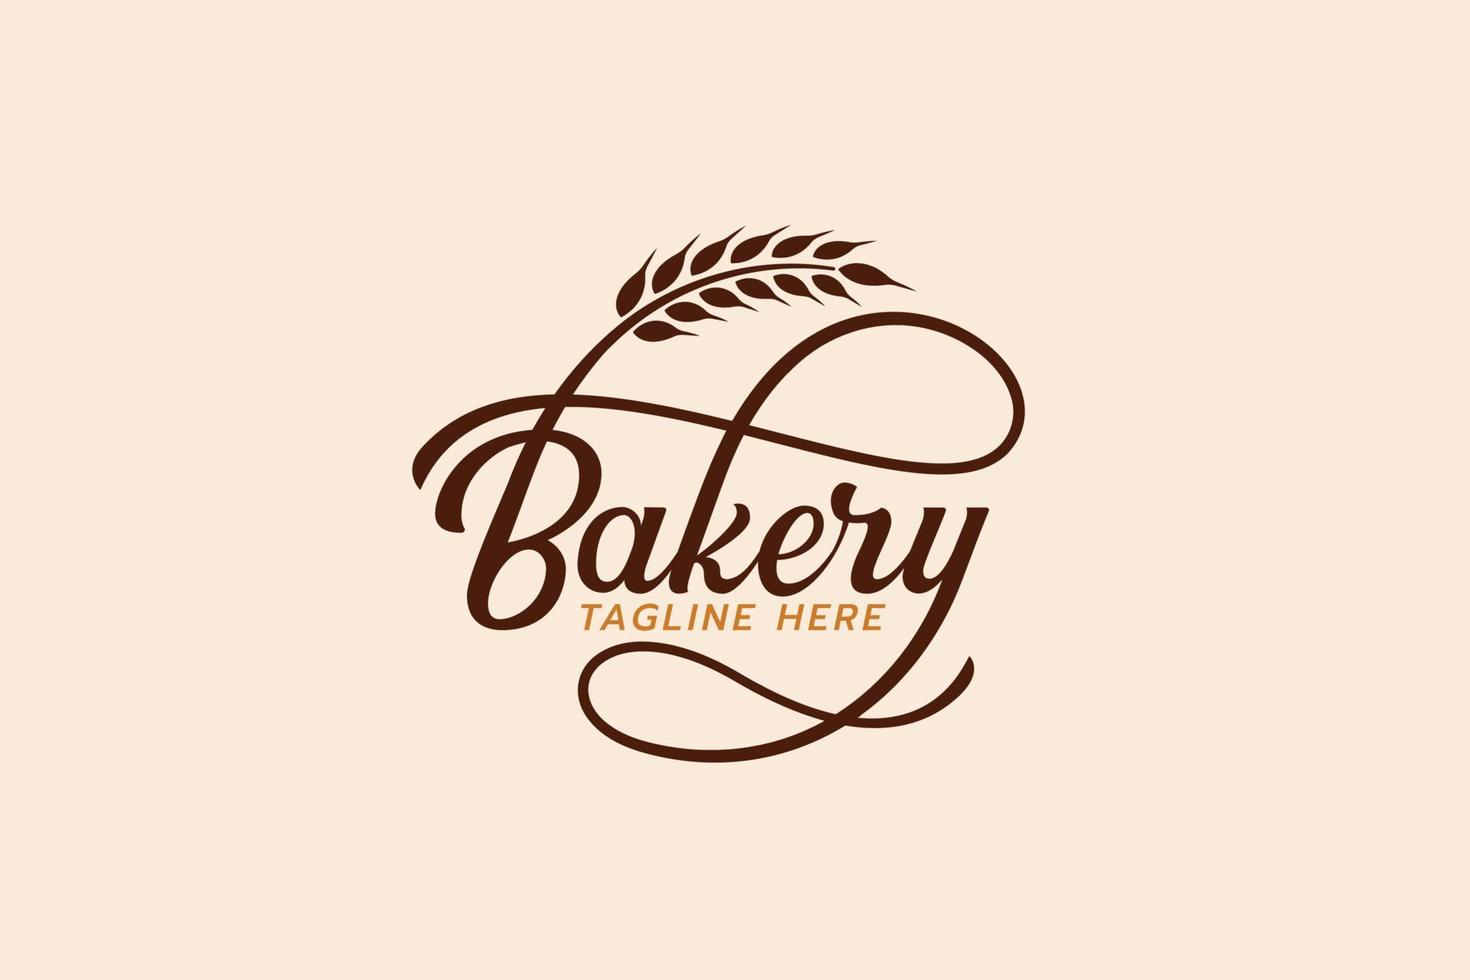 a simple bakery logo with a combination of stylist bakery lettering and wheat vector